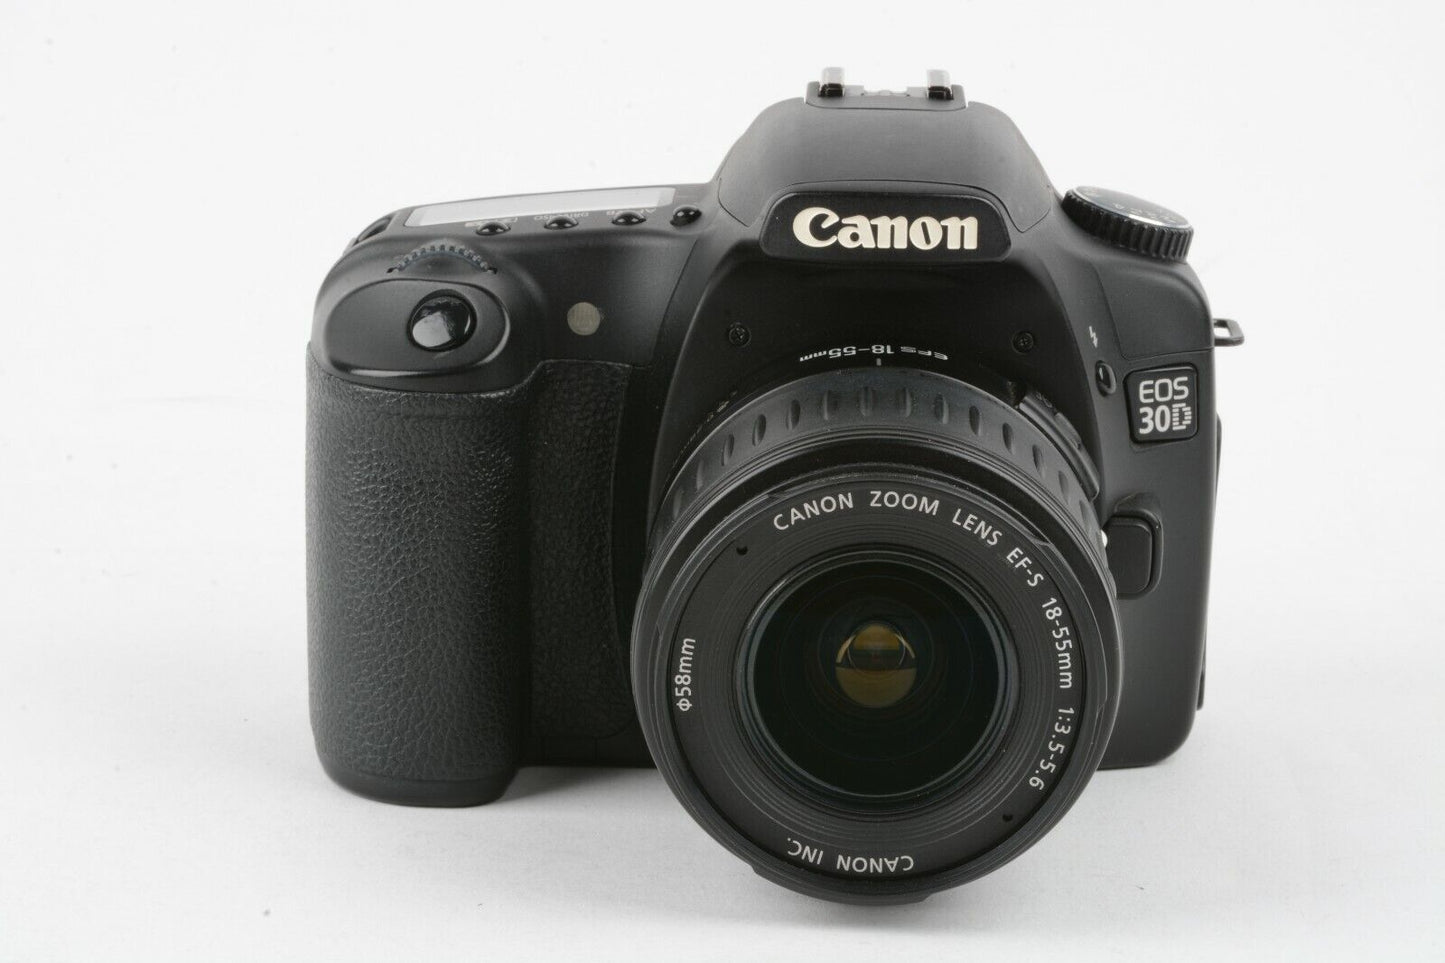 Canada: Canon EOS 30D 8.2MP Digital SLR Camera Kit with EF-S 18-55mm  f/3.5-5.6 Lens